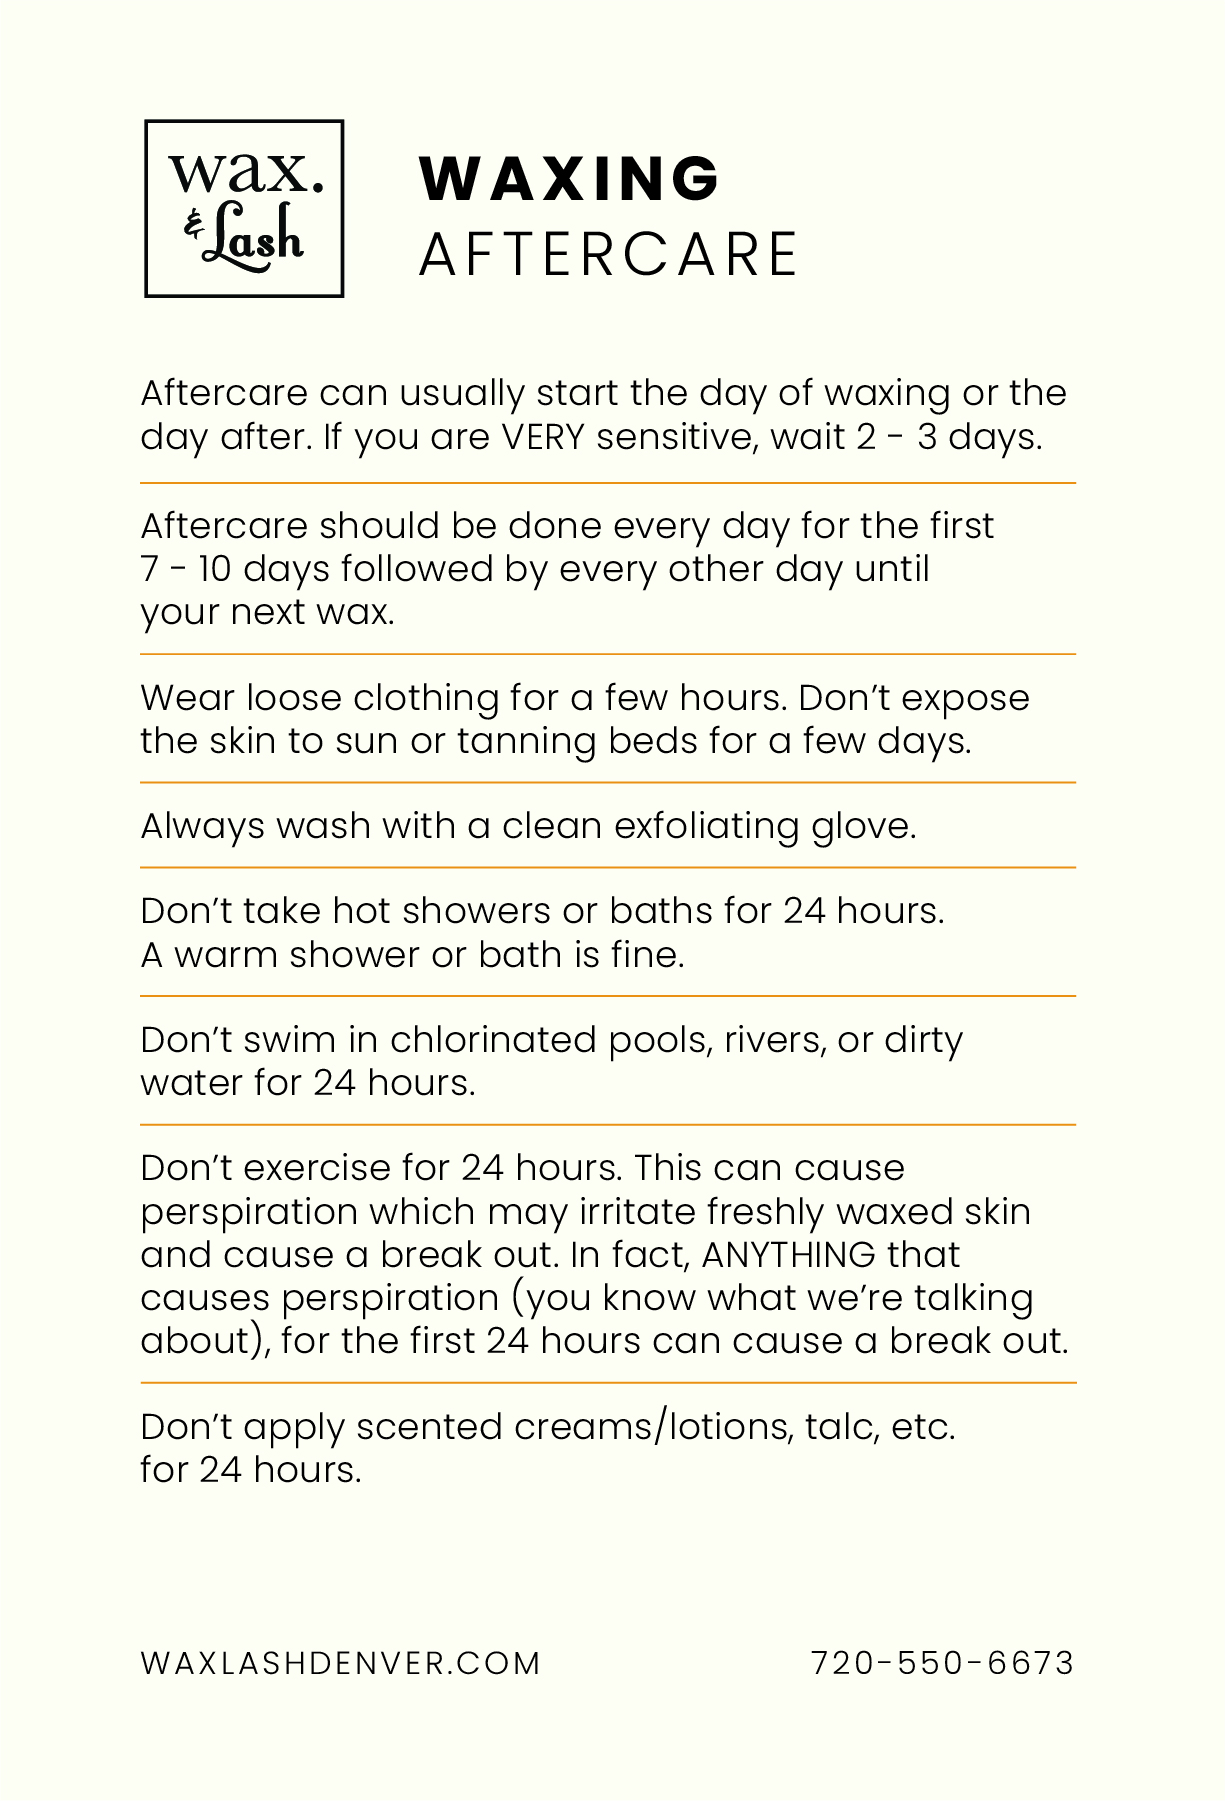 Bikini Wax Aftercare - The Dos and Don'ts for Perfect Skin